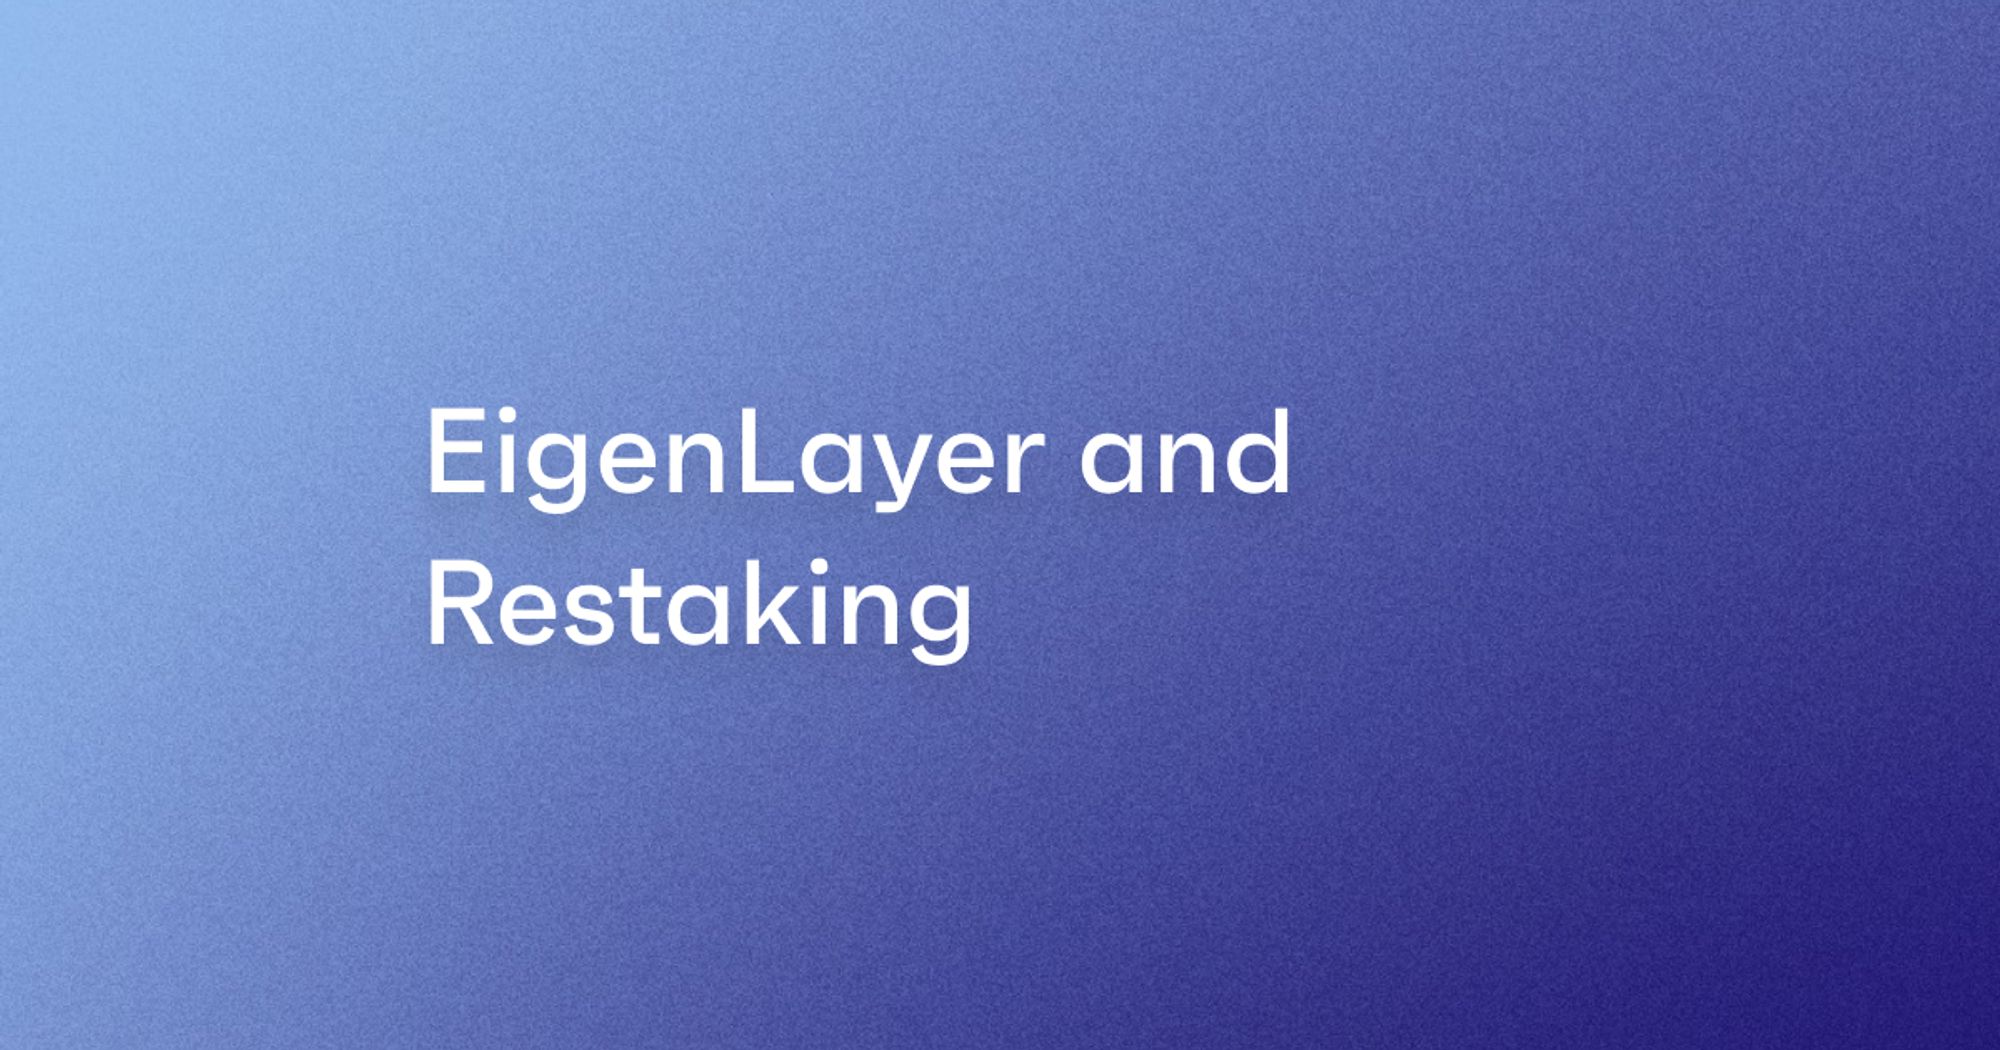 EigenLayer and Restaking blog cover image